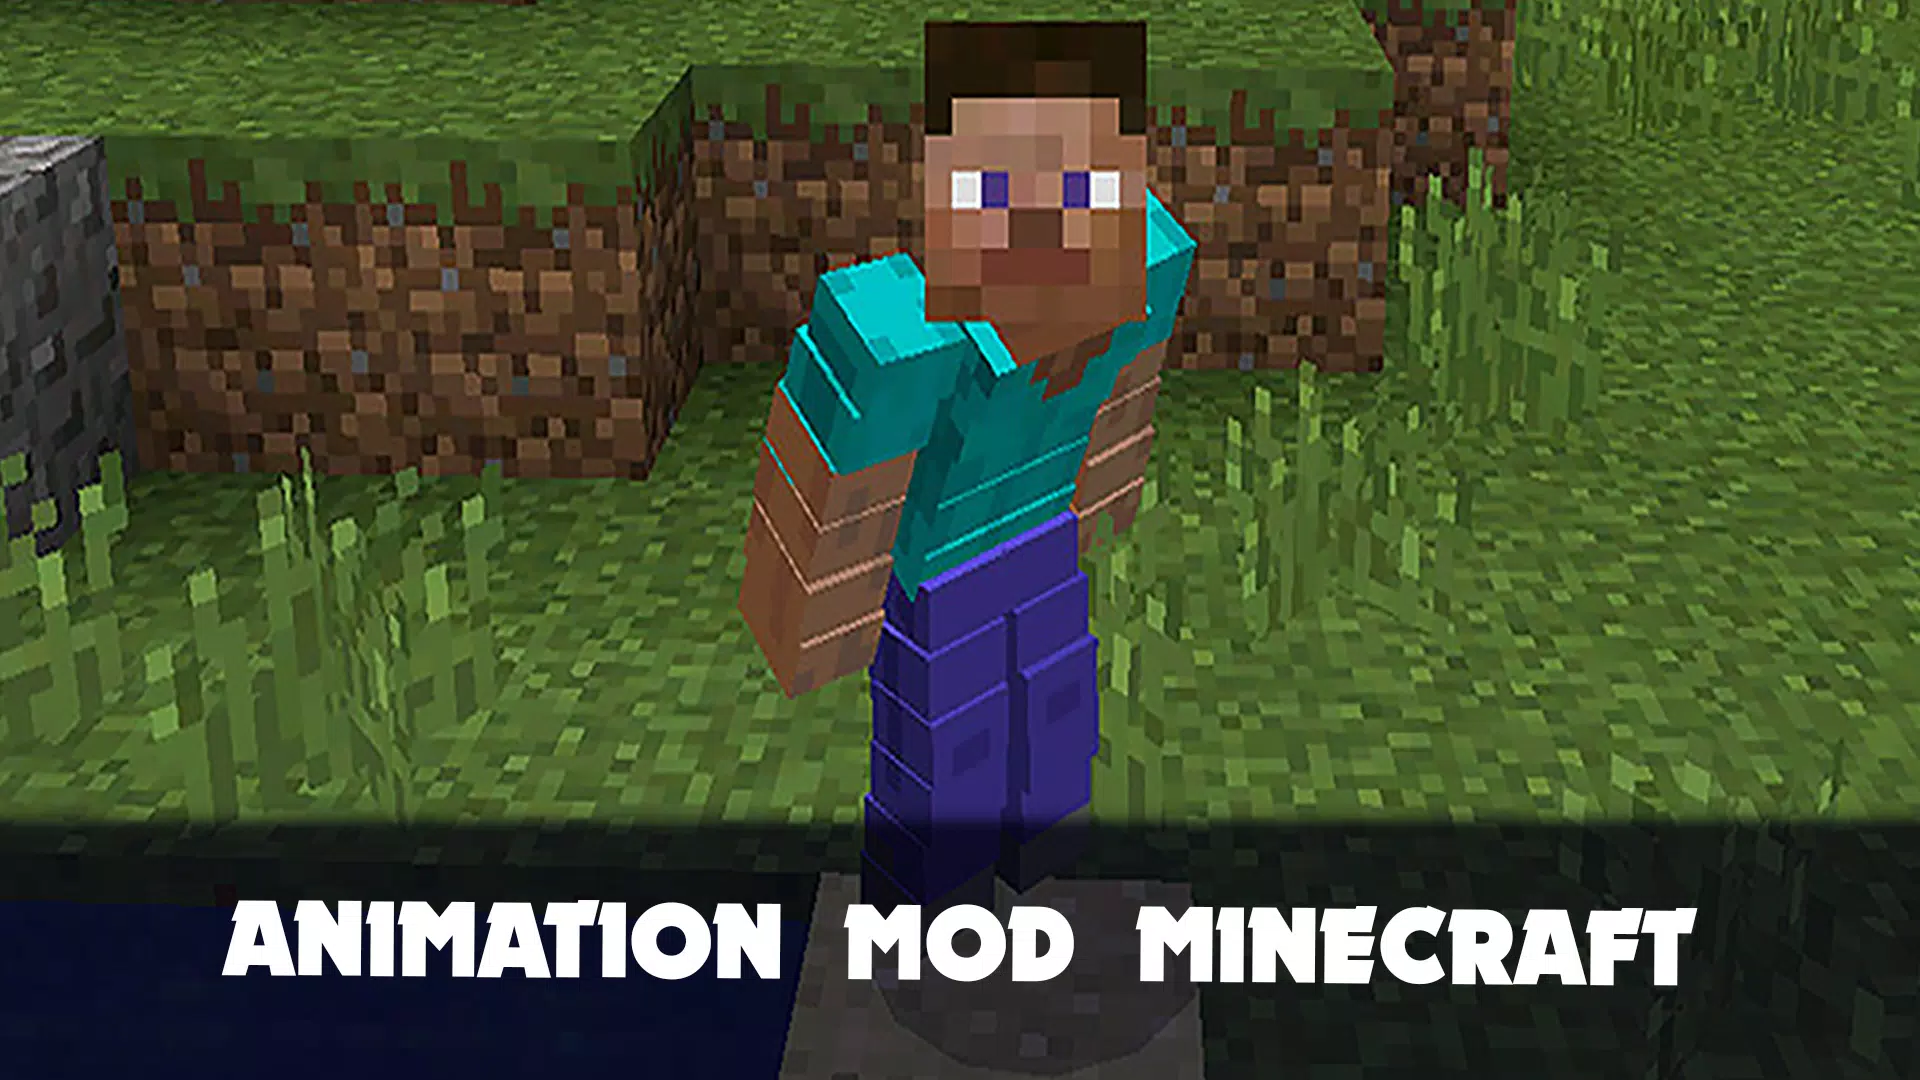 Download Animations Mod V3 / Role-playing game animation mod for